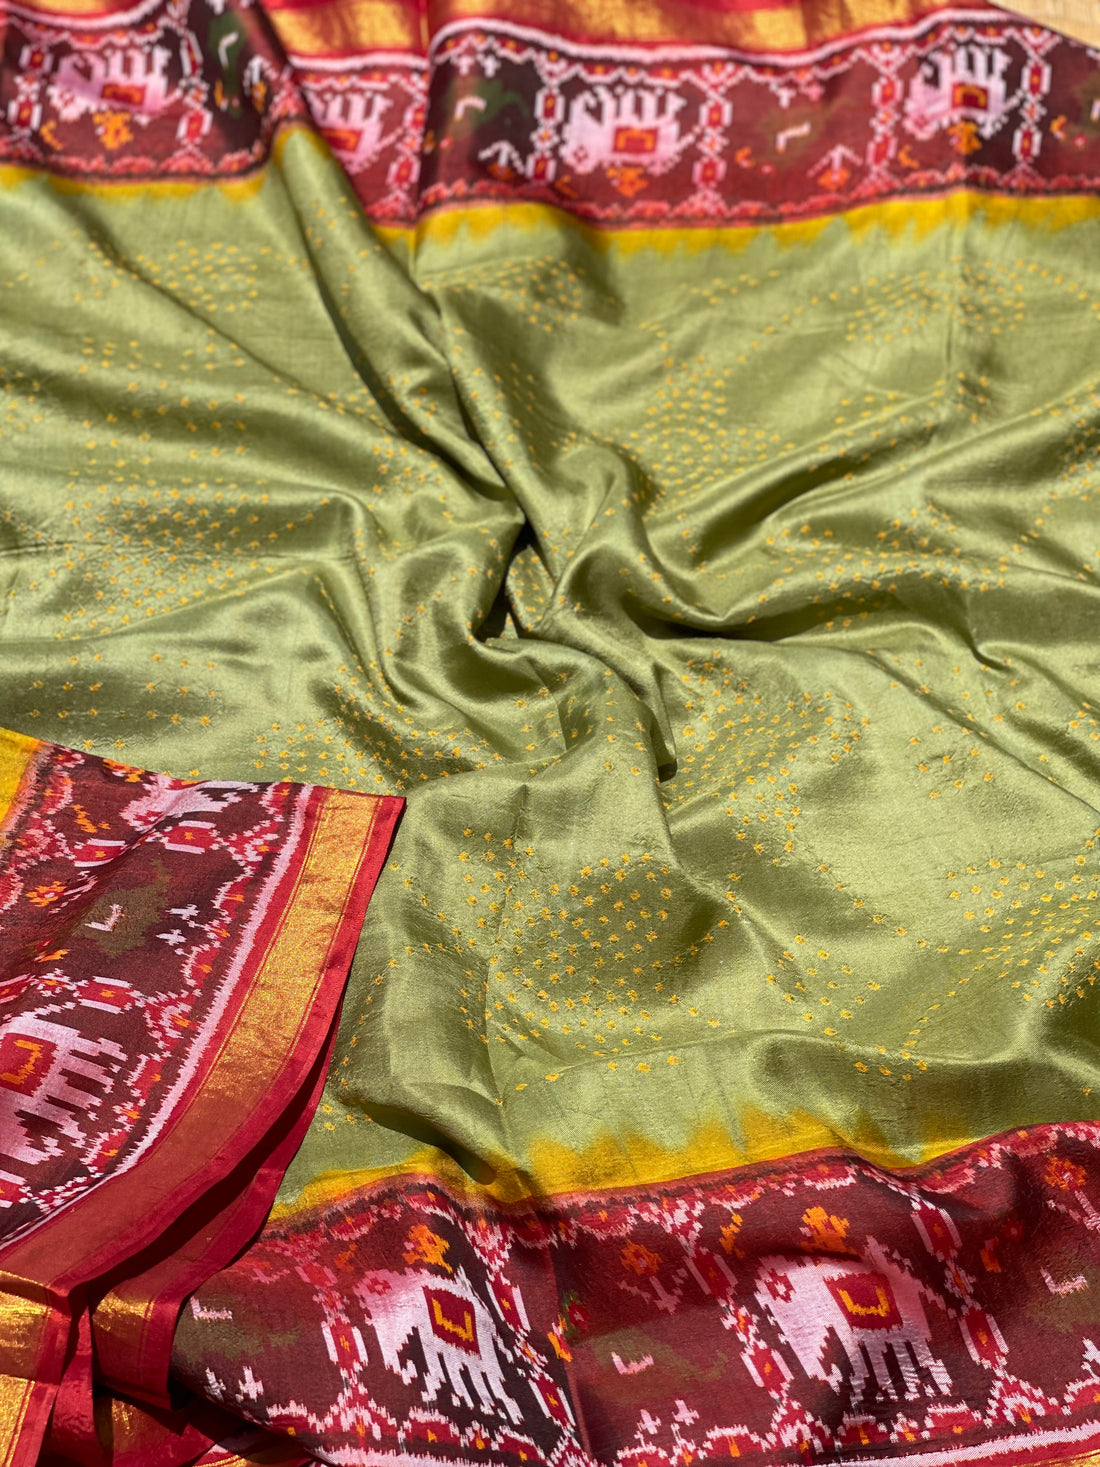 Hand knotted Rai Bhadhej Tie Dyed Double ikkat Rajkot silk saree on Moss green with yellow